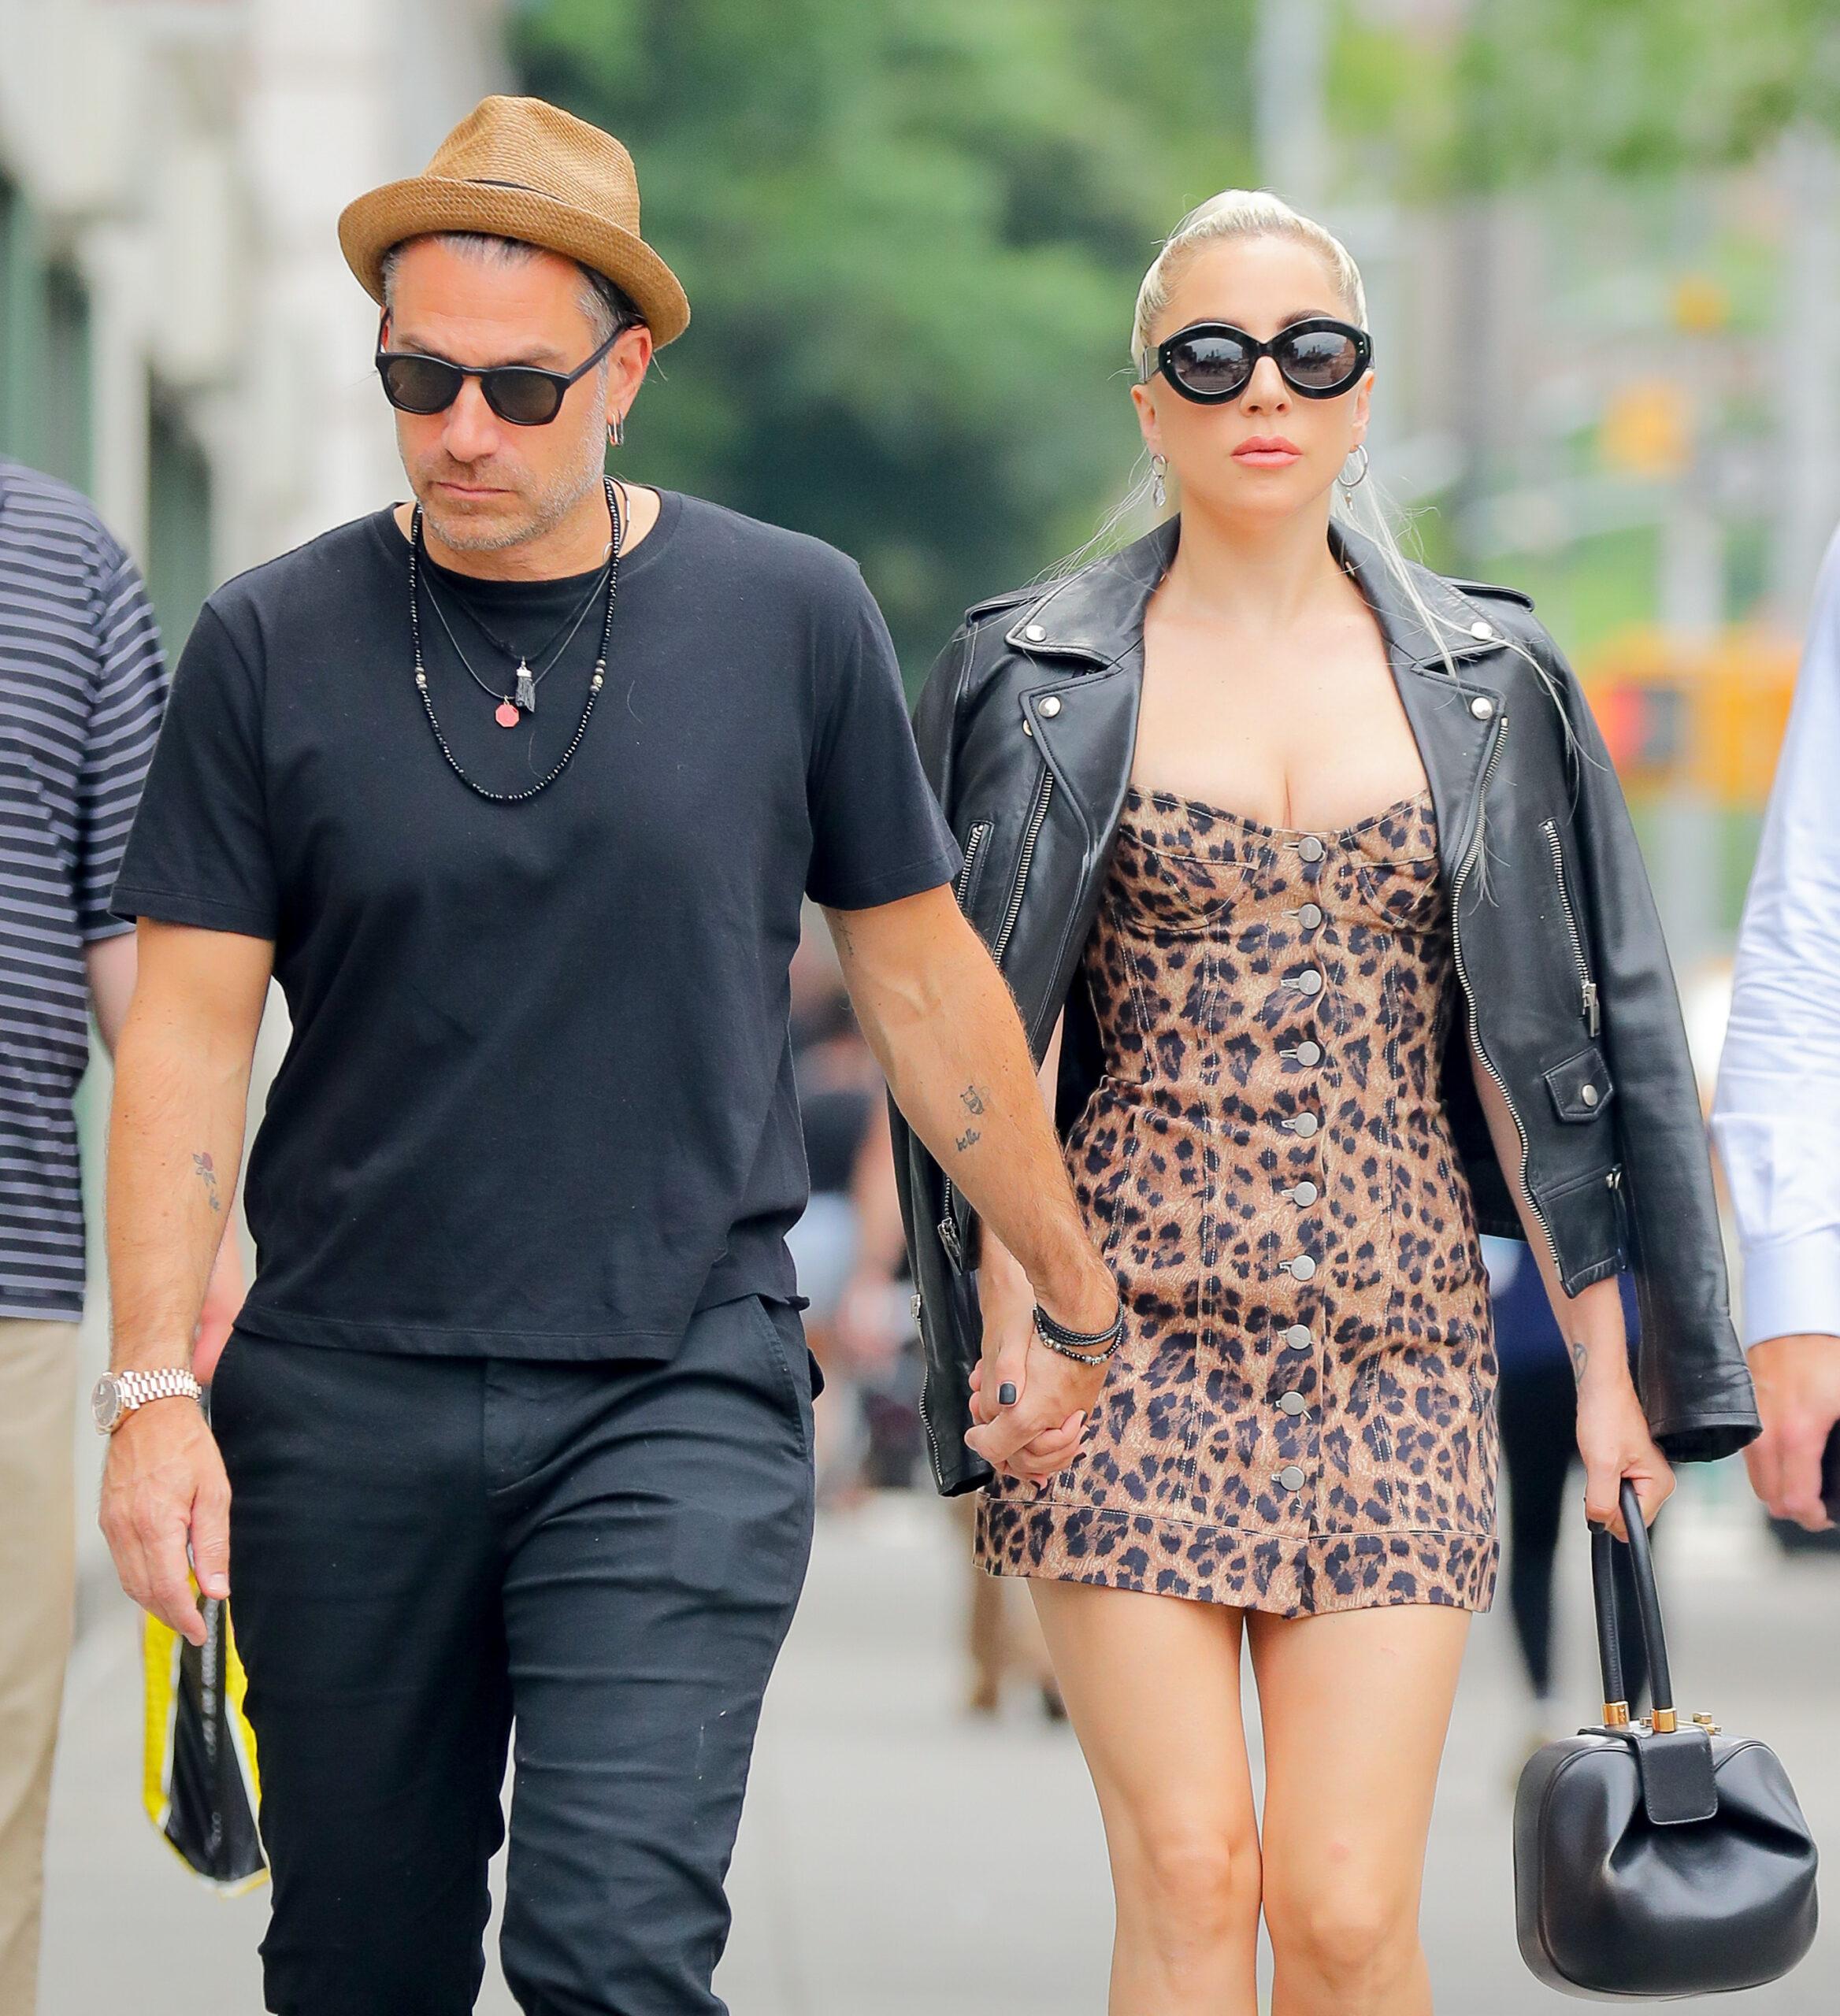 Lady Gaga and boyfriend Christian Carino spotted handing hands while taking stroll in New York City